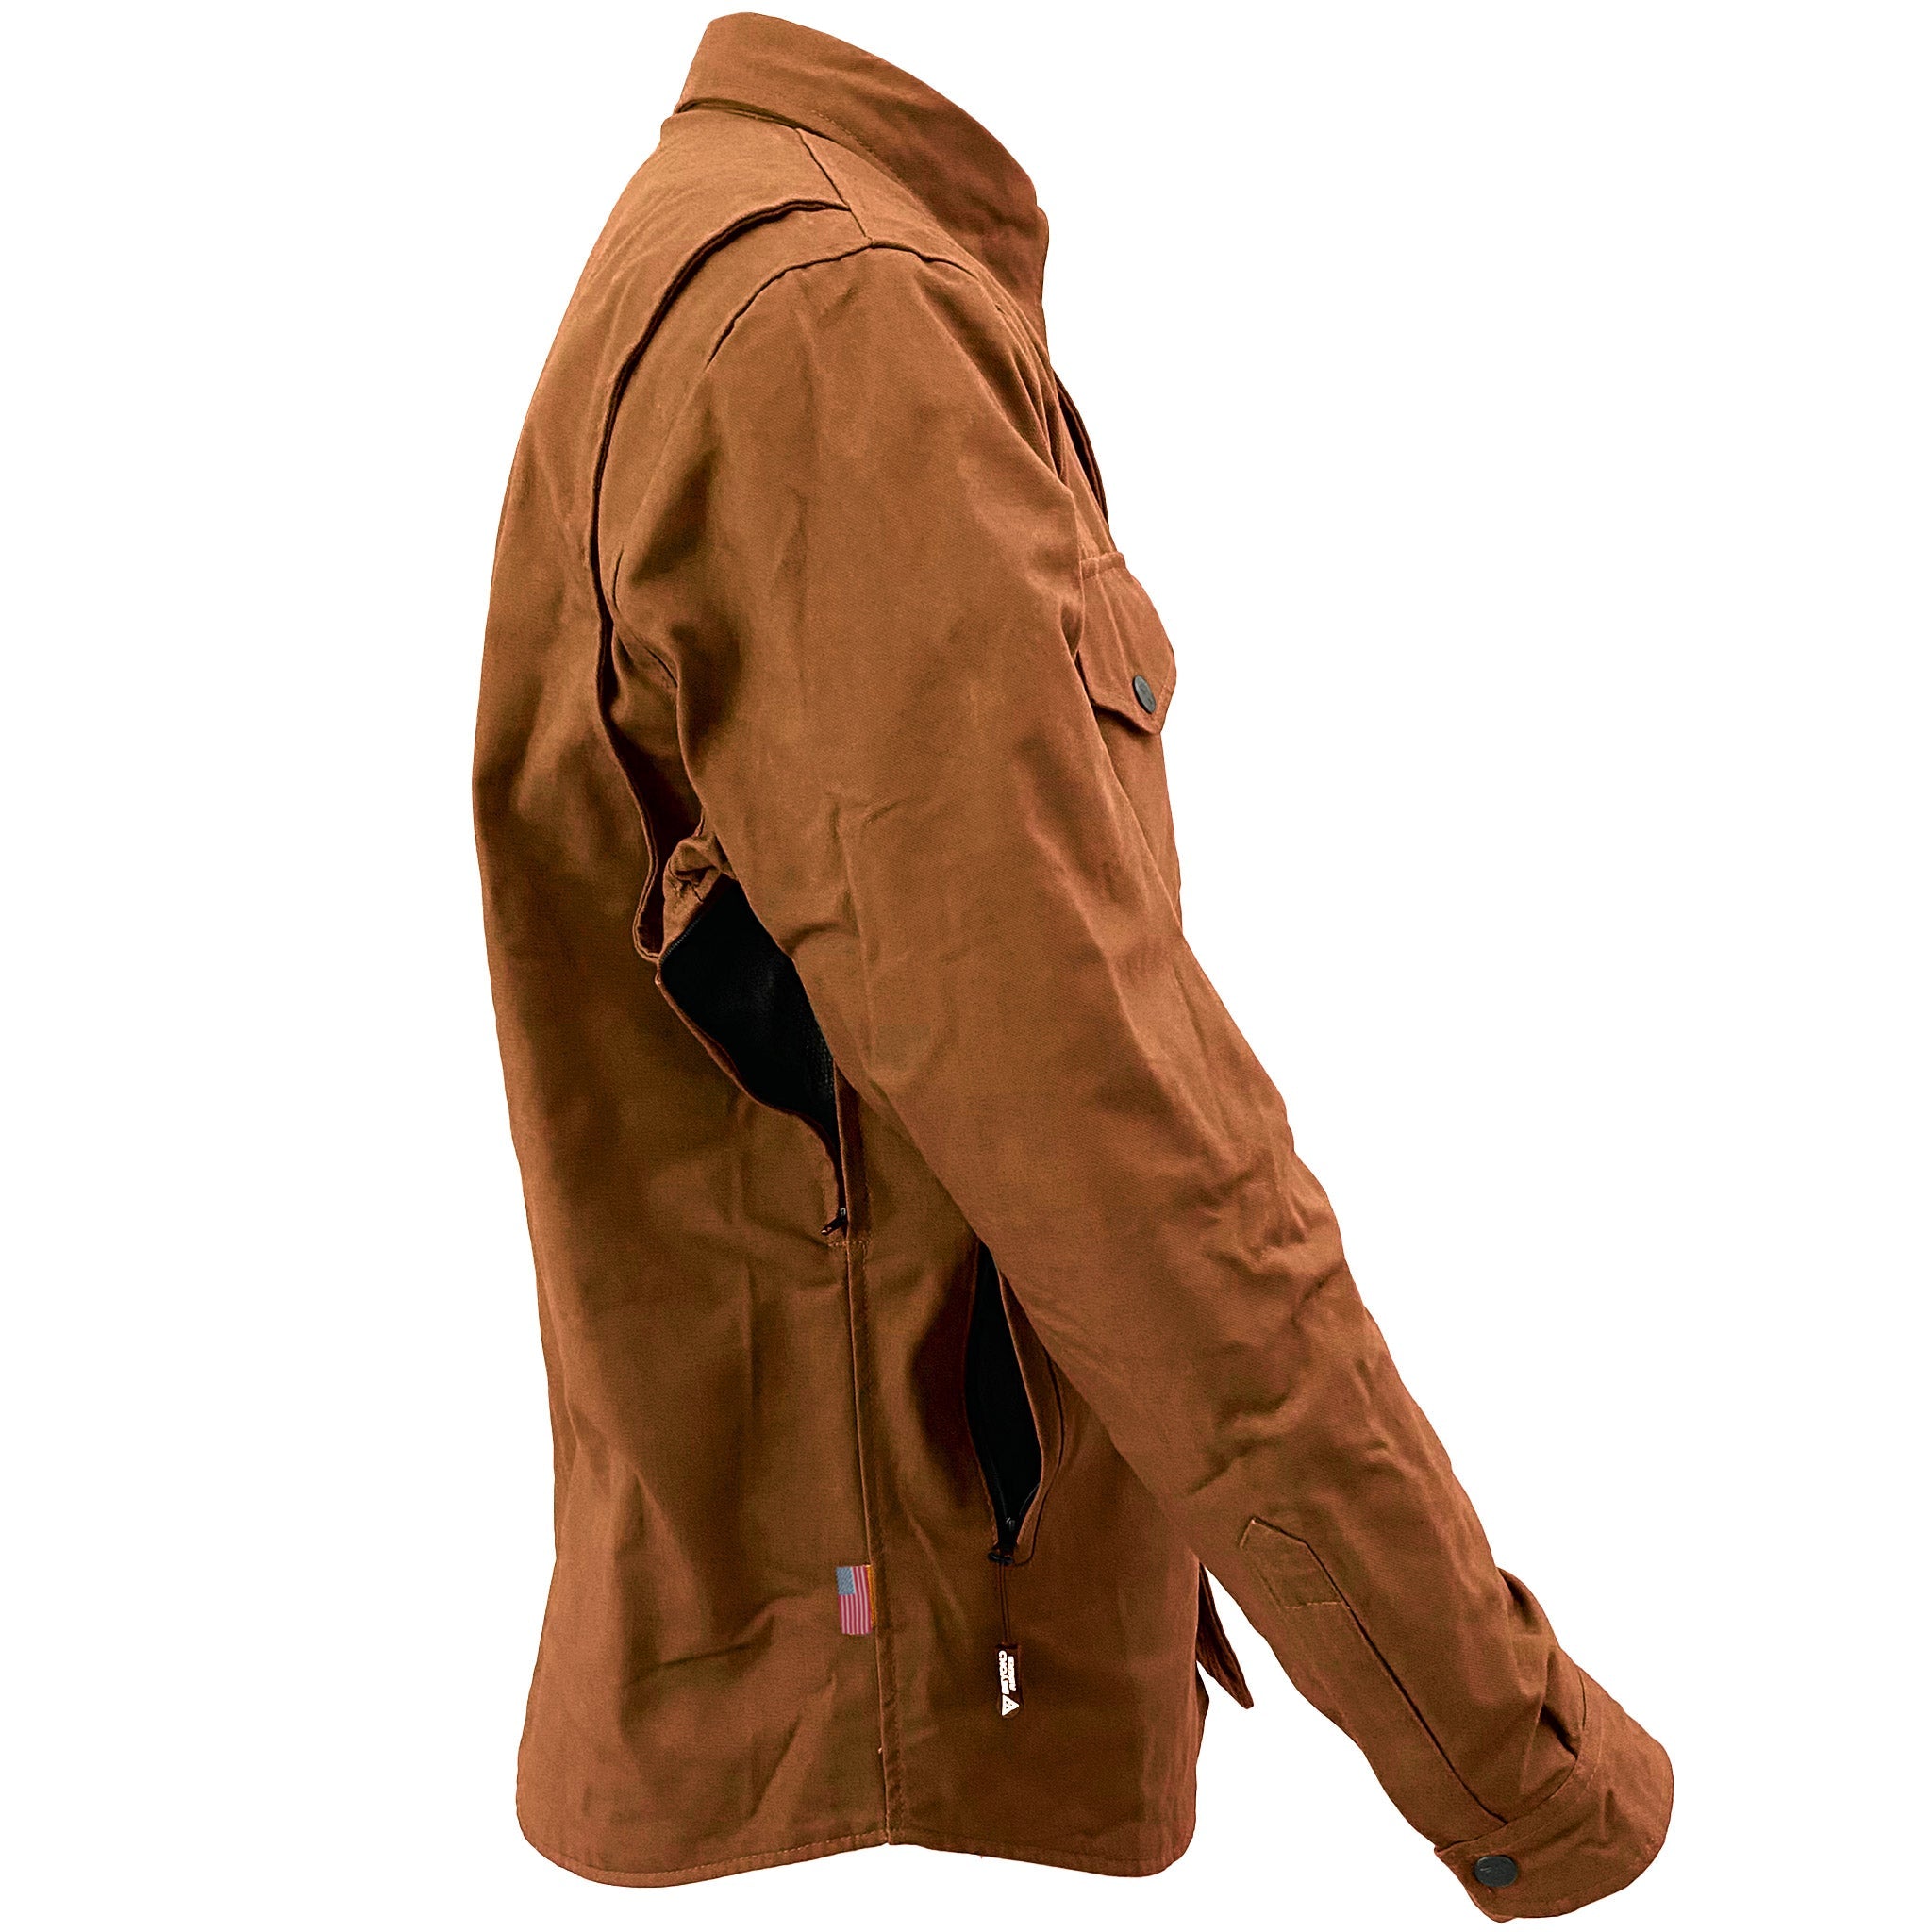 SALE Protective Canvas Jacket for Men - Light Brown with Pads